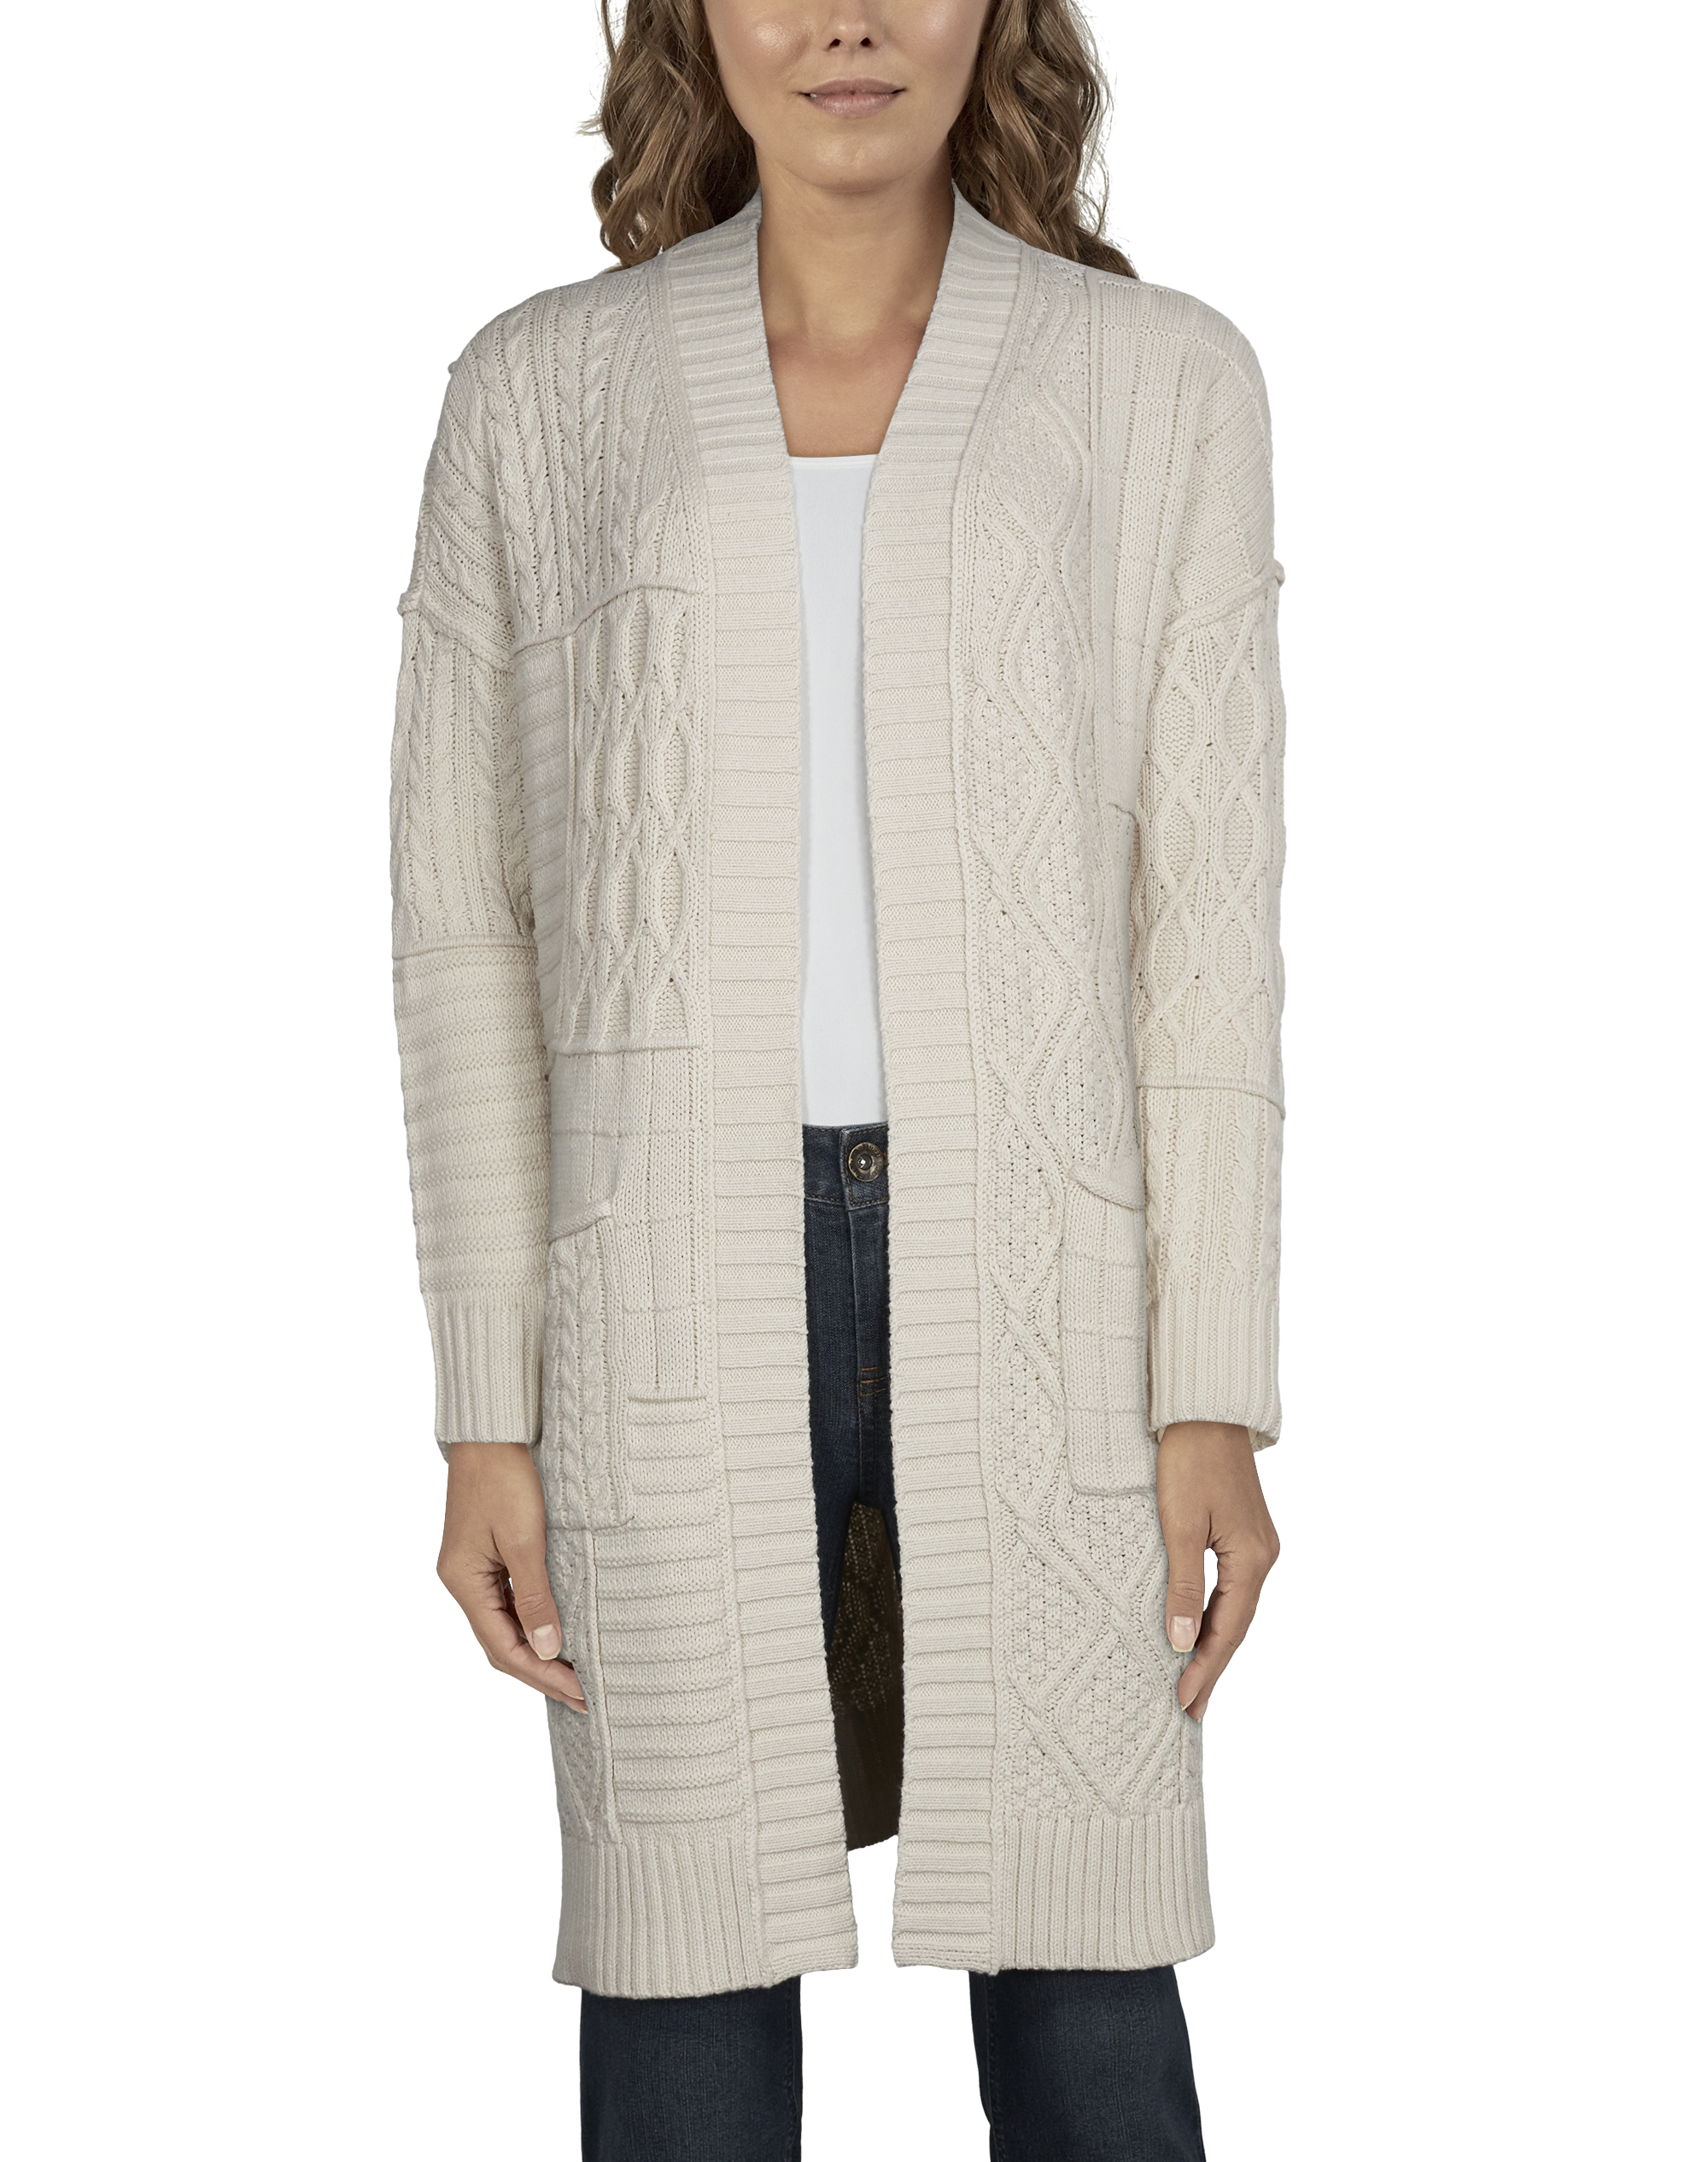 Natural Reflections Mixed-Stitch Cardigan for Ladies Pro Shops | Bass